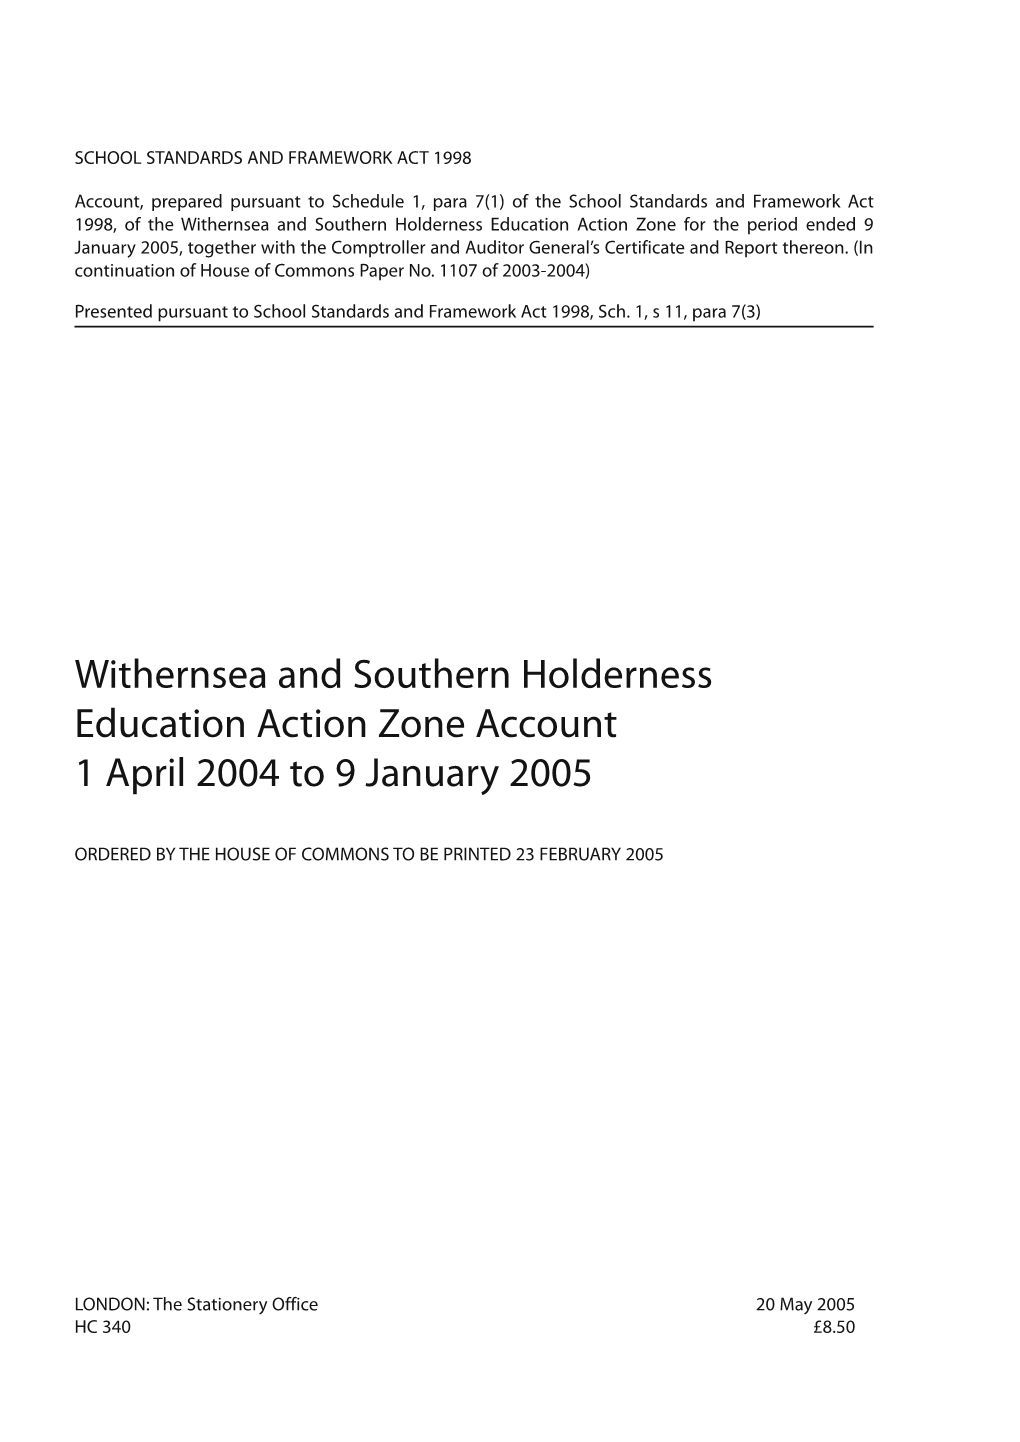 Withernsea and Southern Holderness Education Action Zone Account 1 April 2004 to 9 January 2005